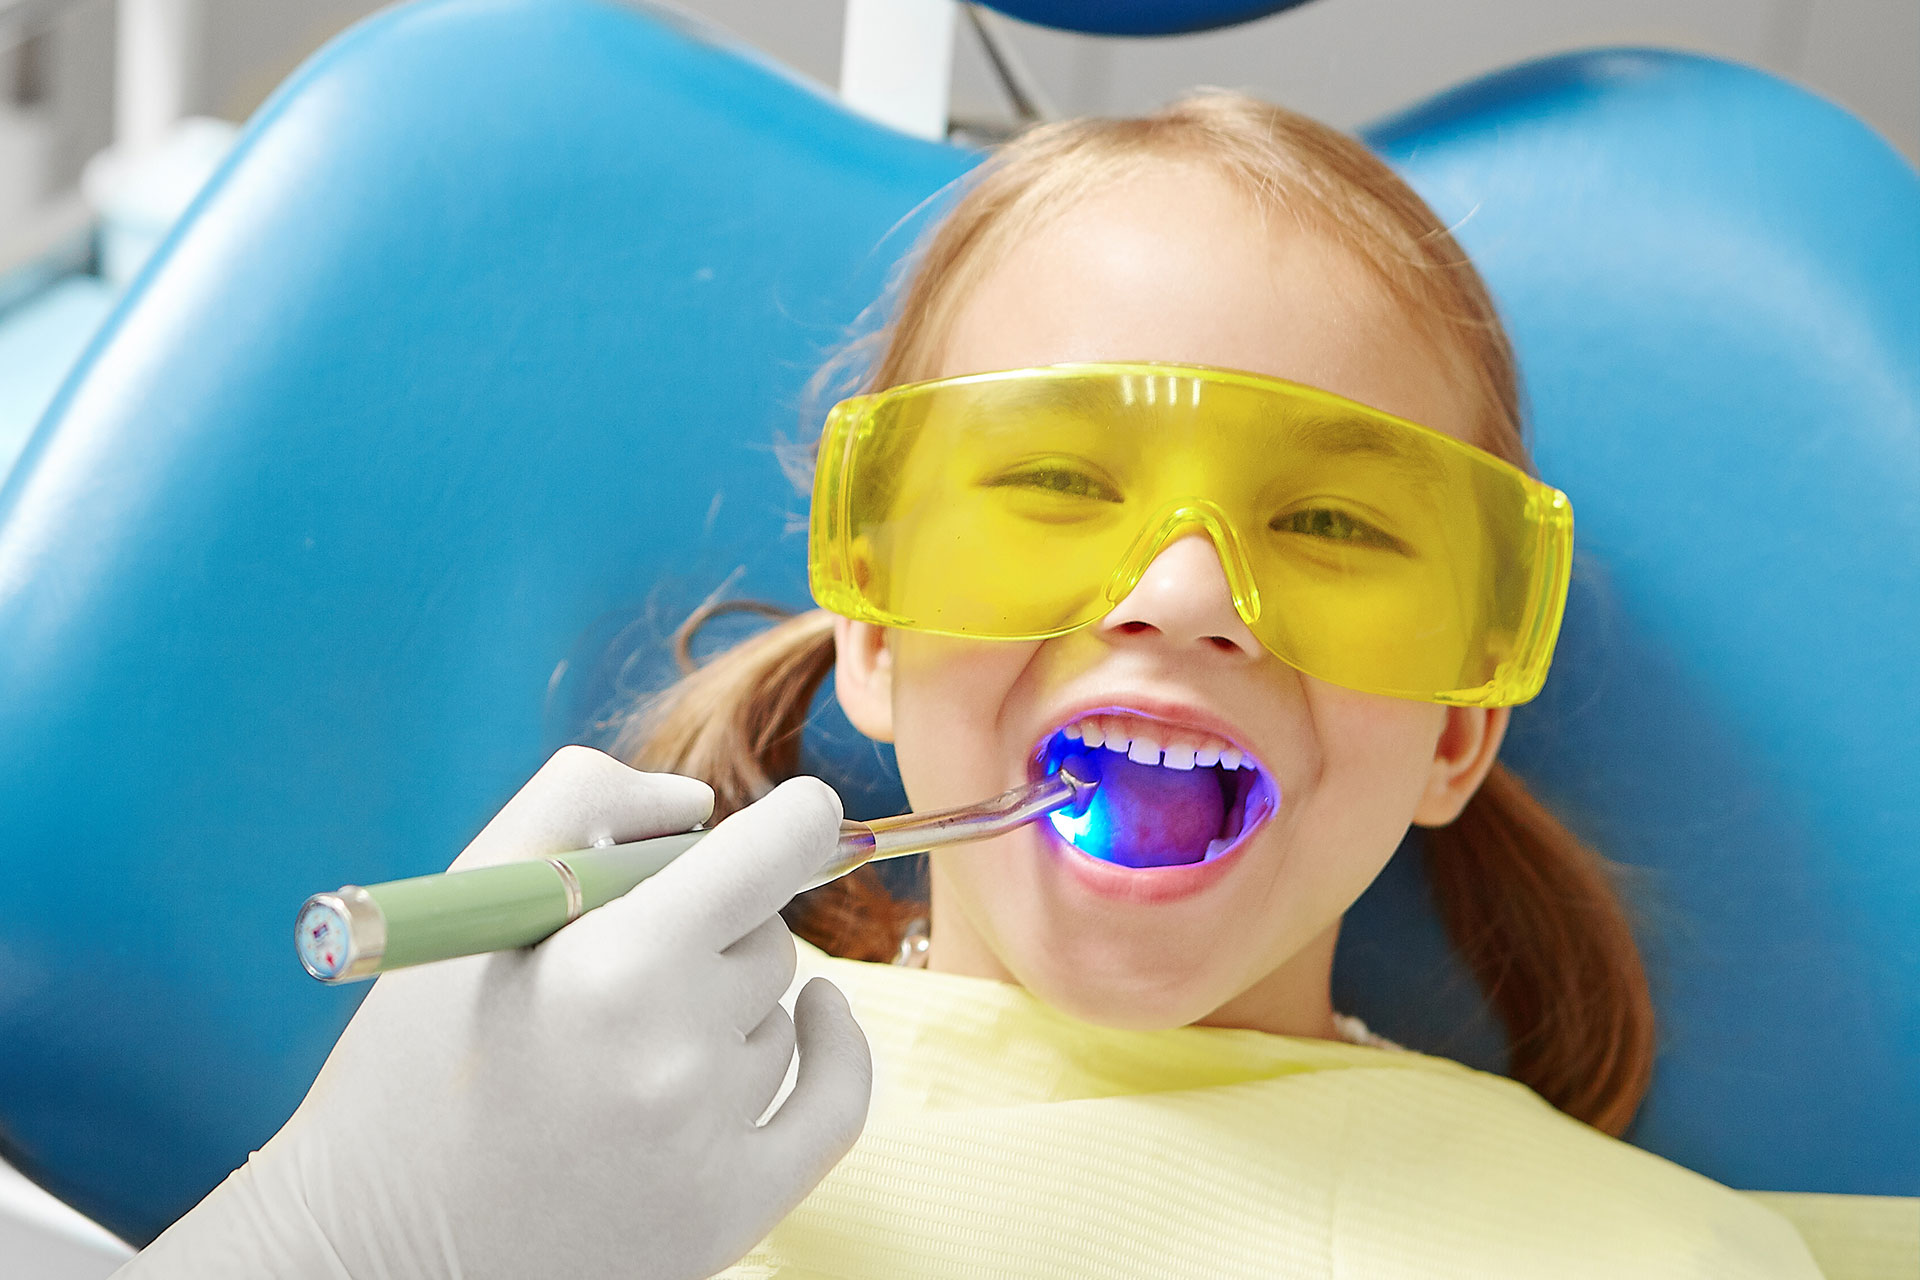 A young girl in a dental office, wearing yellow protective goggles and holding a toothbrush, brushing her teeth while seated in a dentist s chair.